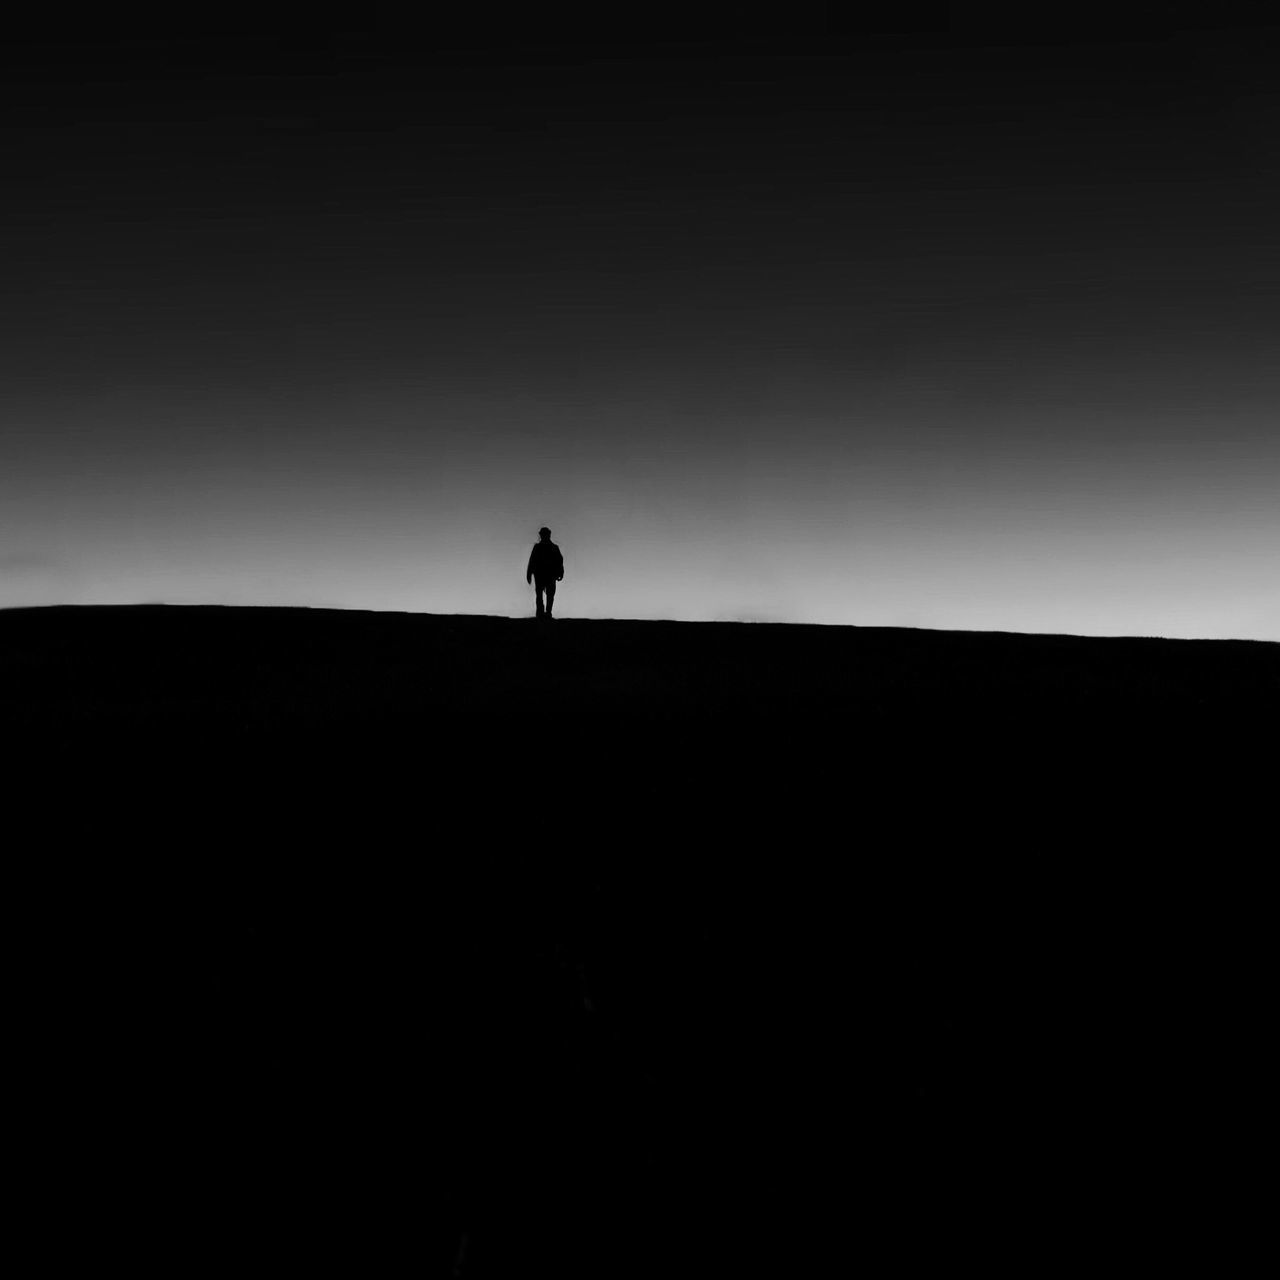 silhouette, copy space, clear sky, men, lifestyles, standing, full length, outline, leisure activity, dark, rear view, unrecognizable person, walking, tranquility, tranquil scene, dusk, nature